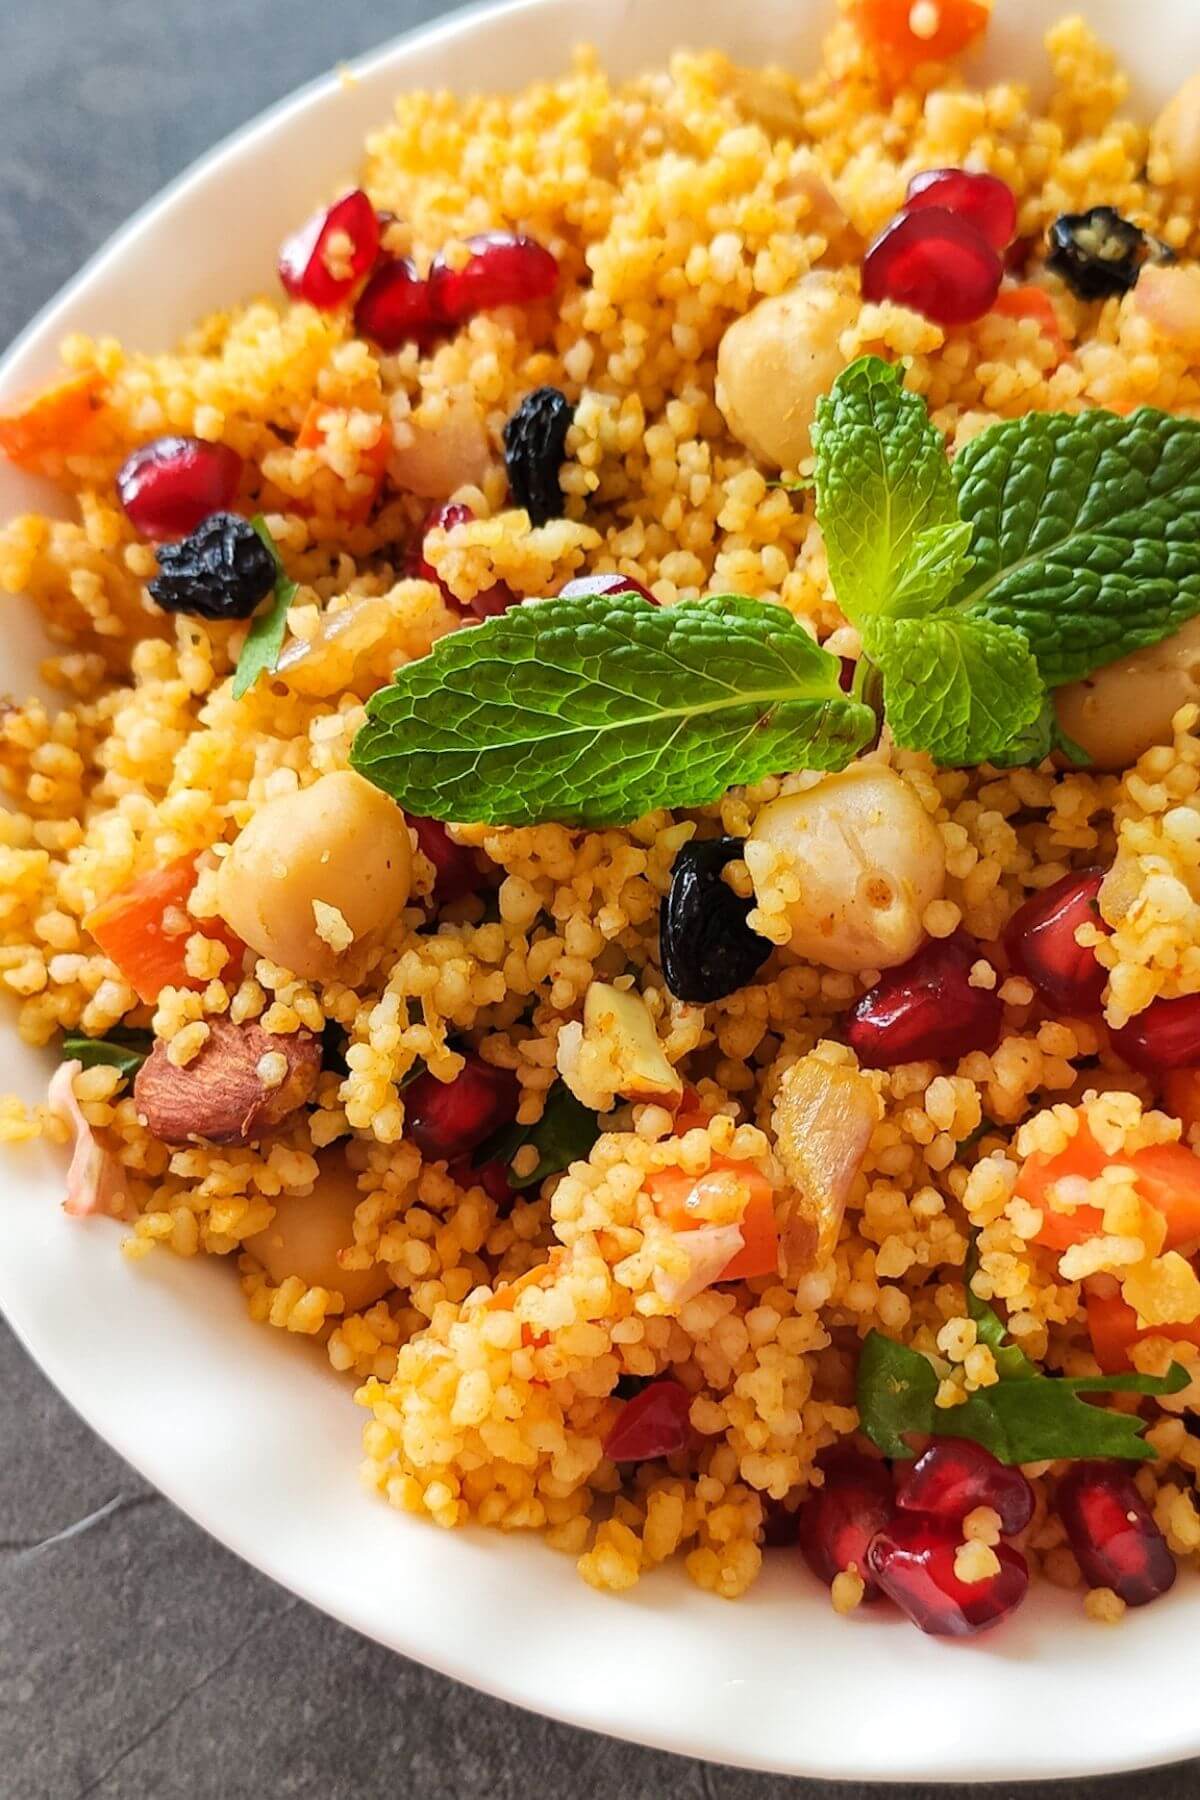 Couscous salad garnished with mint leaves in a white bowl